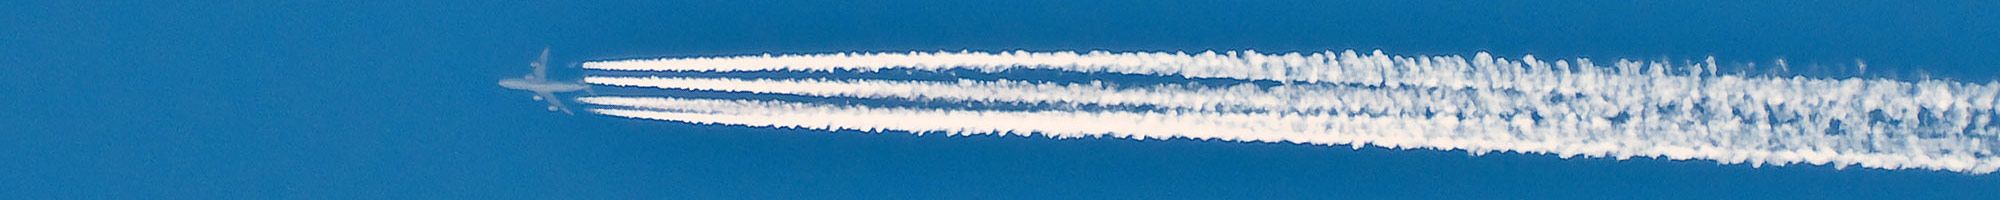 Jet and trail in sky